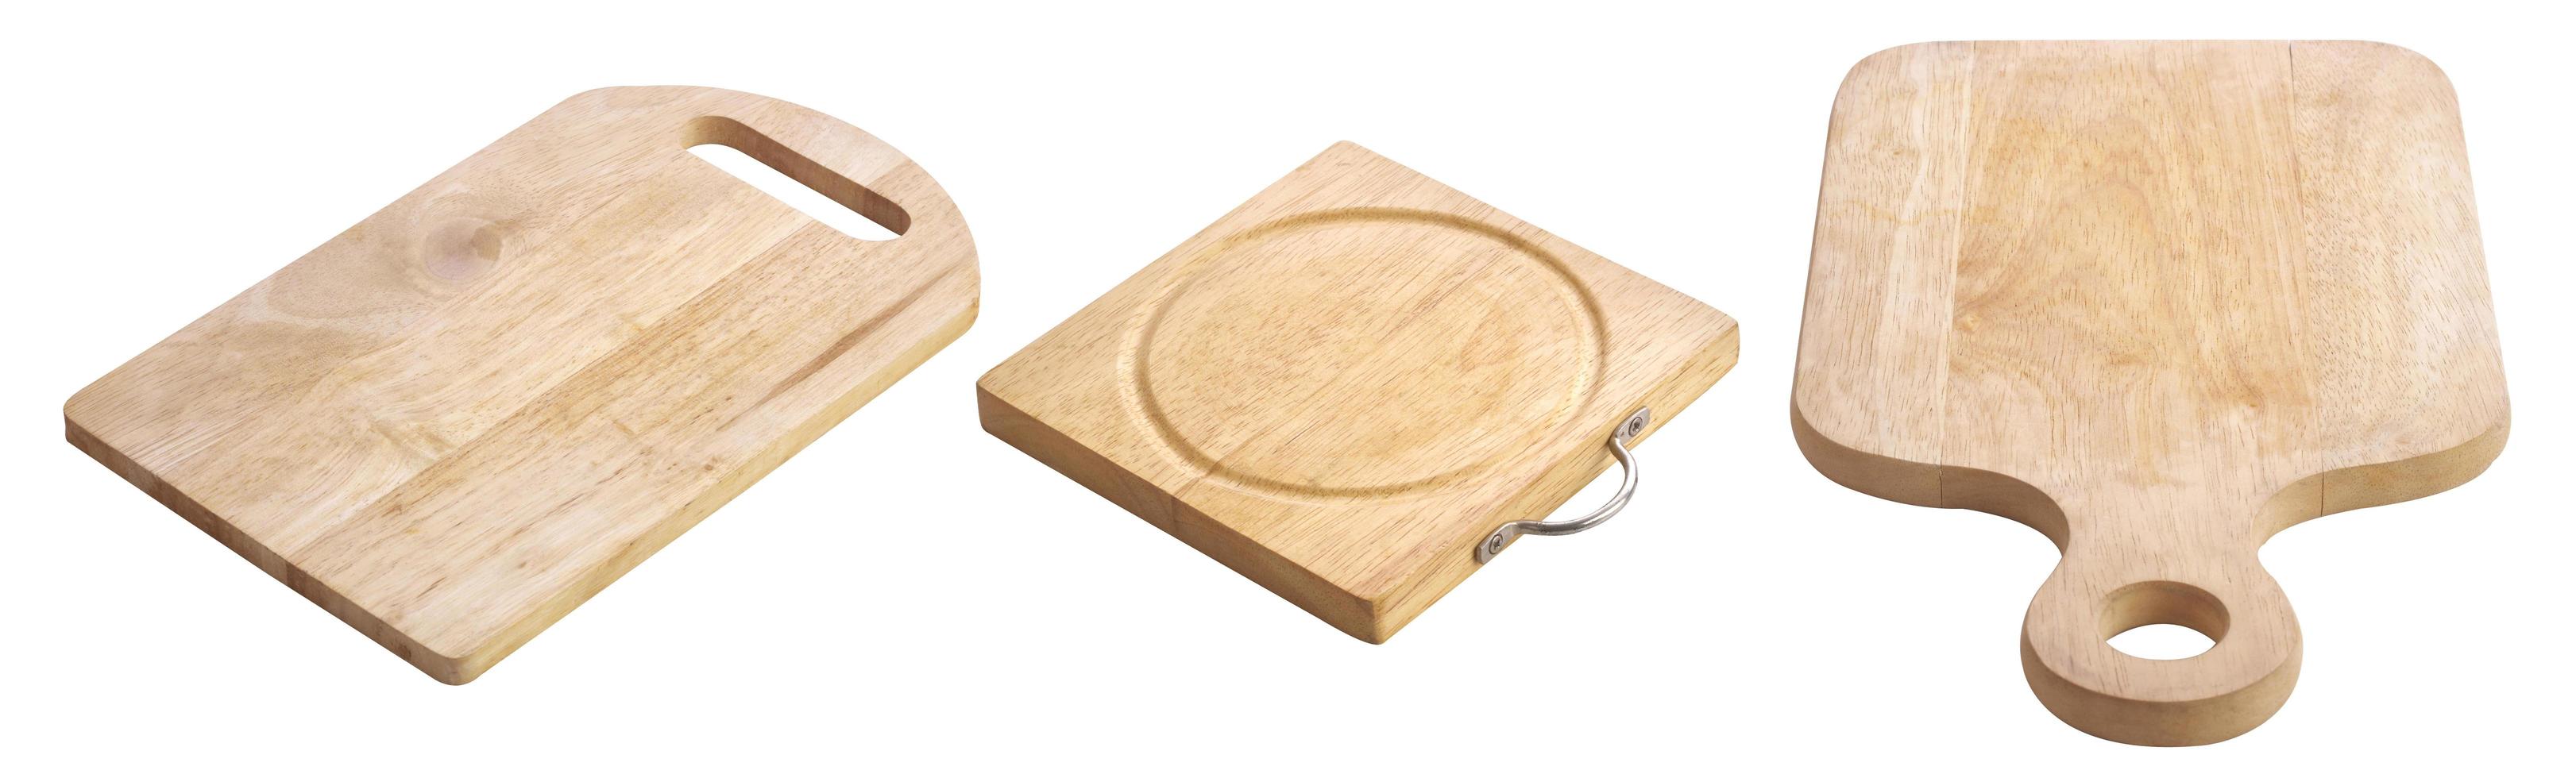 Group of wooden tray on white background photo